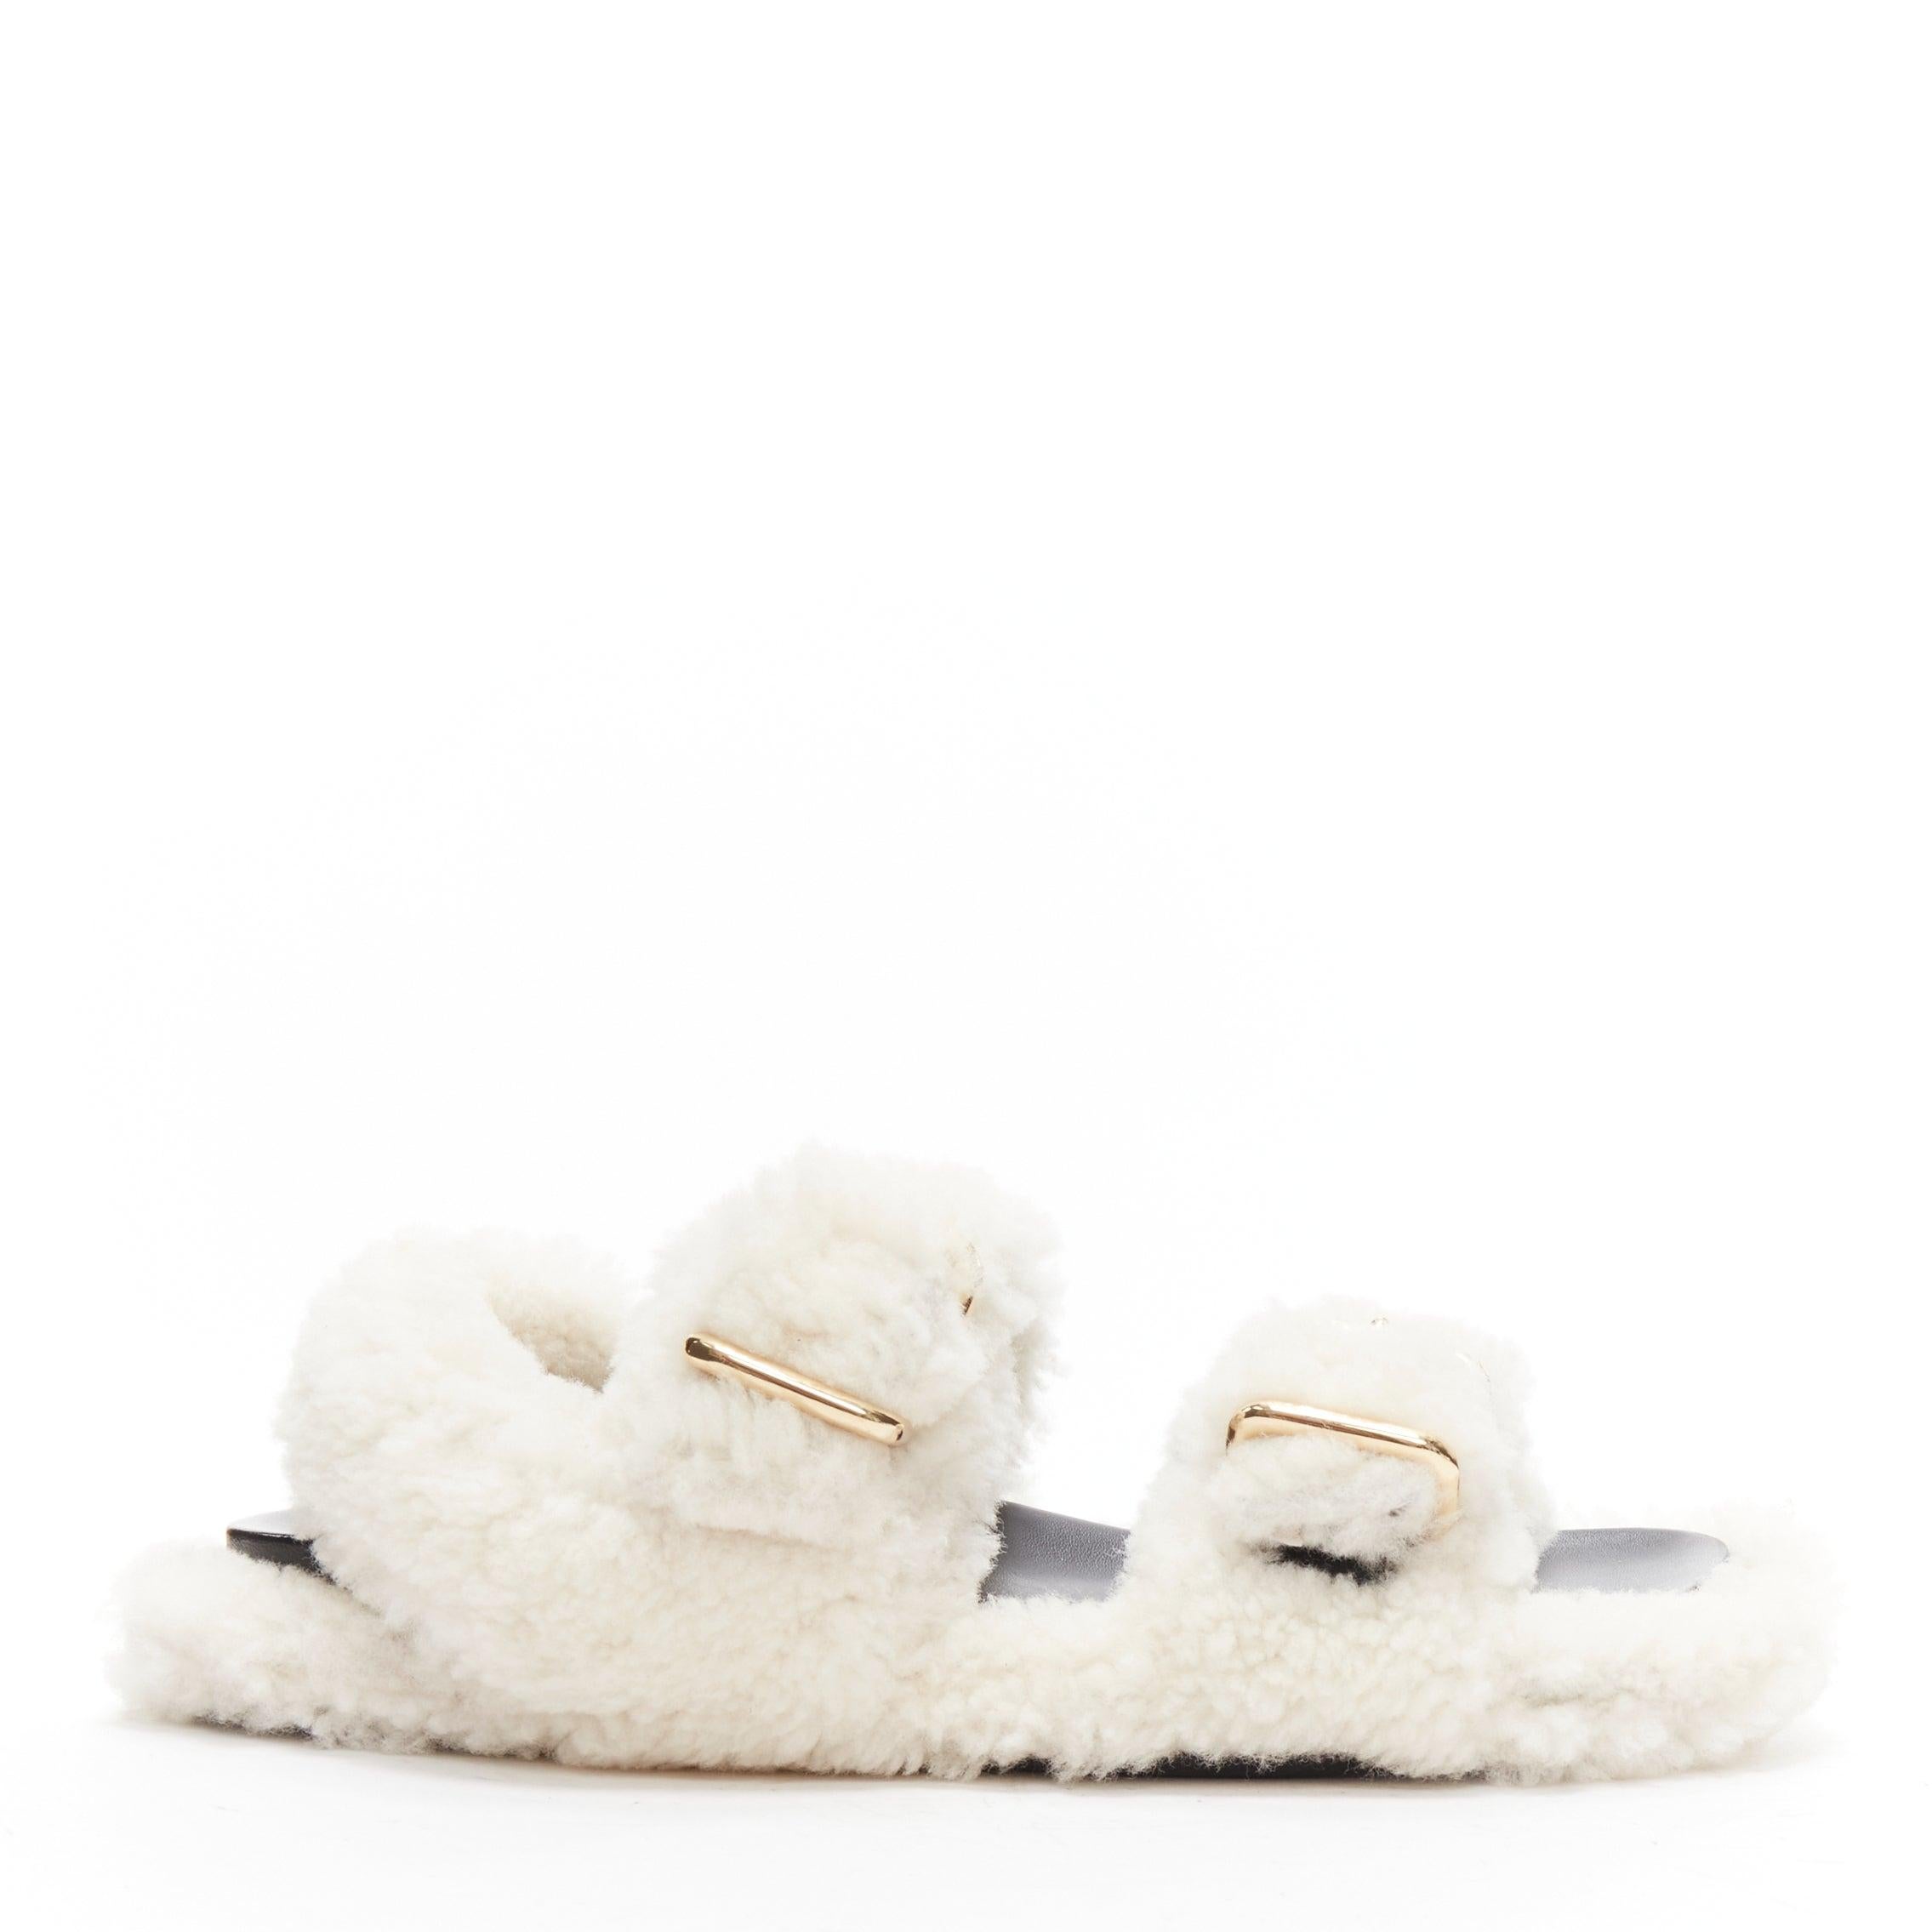 MARNI white shearling gold buckles double strap black leather lined flat sandals EU38
Reference: LNKO/A02202
Brand: Marni
Material: Shearling, Leather, Metal
Color: White, Gold
Pattern: Solid
Closure: Buckle
Lining: Black Leather
Extra Details: